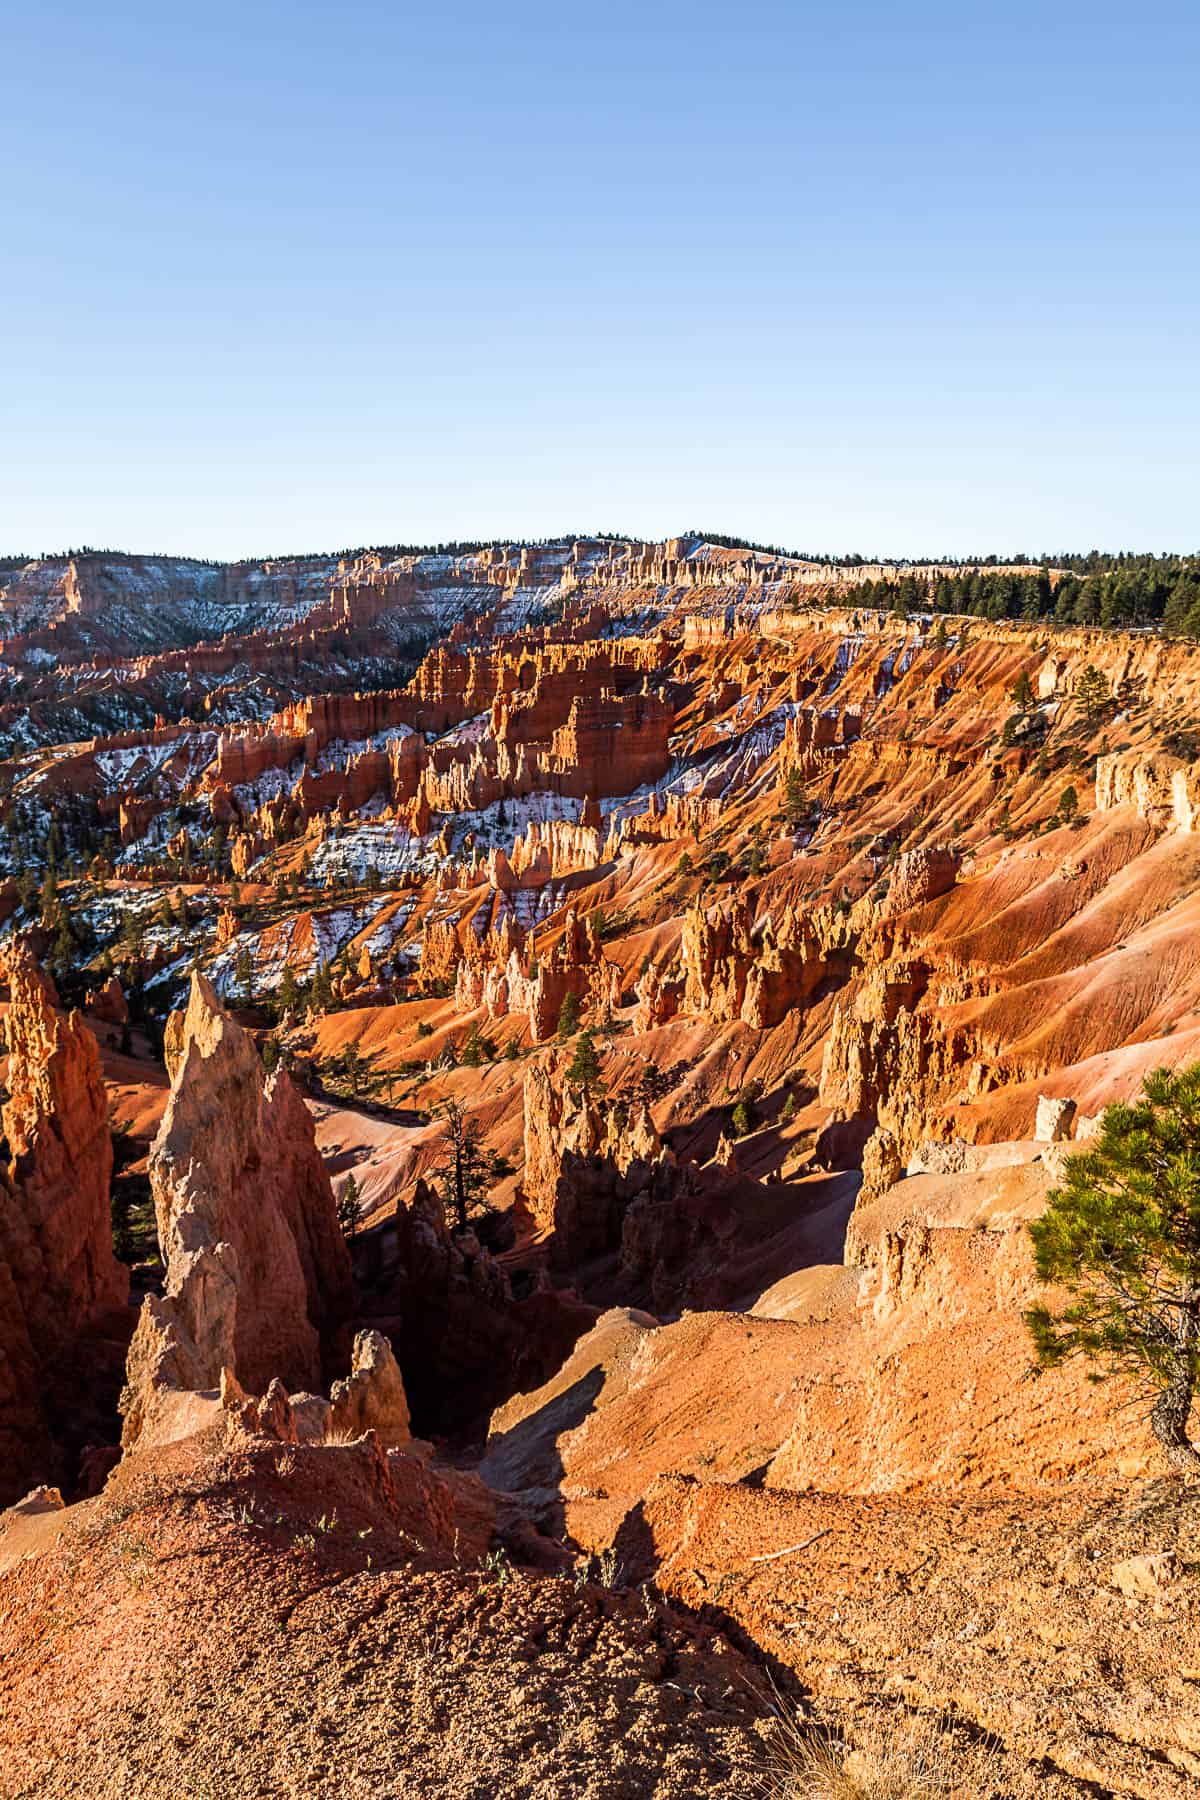 Views from the top of the rim of Bryce Canyon National Park overlooking the hoodoo formations at sunrise.